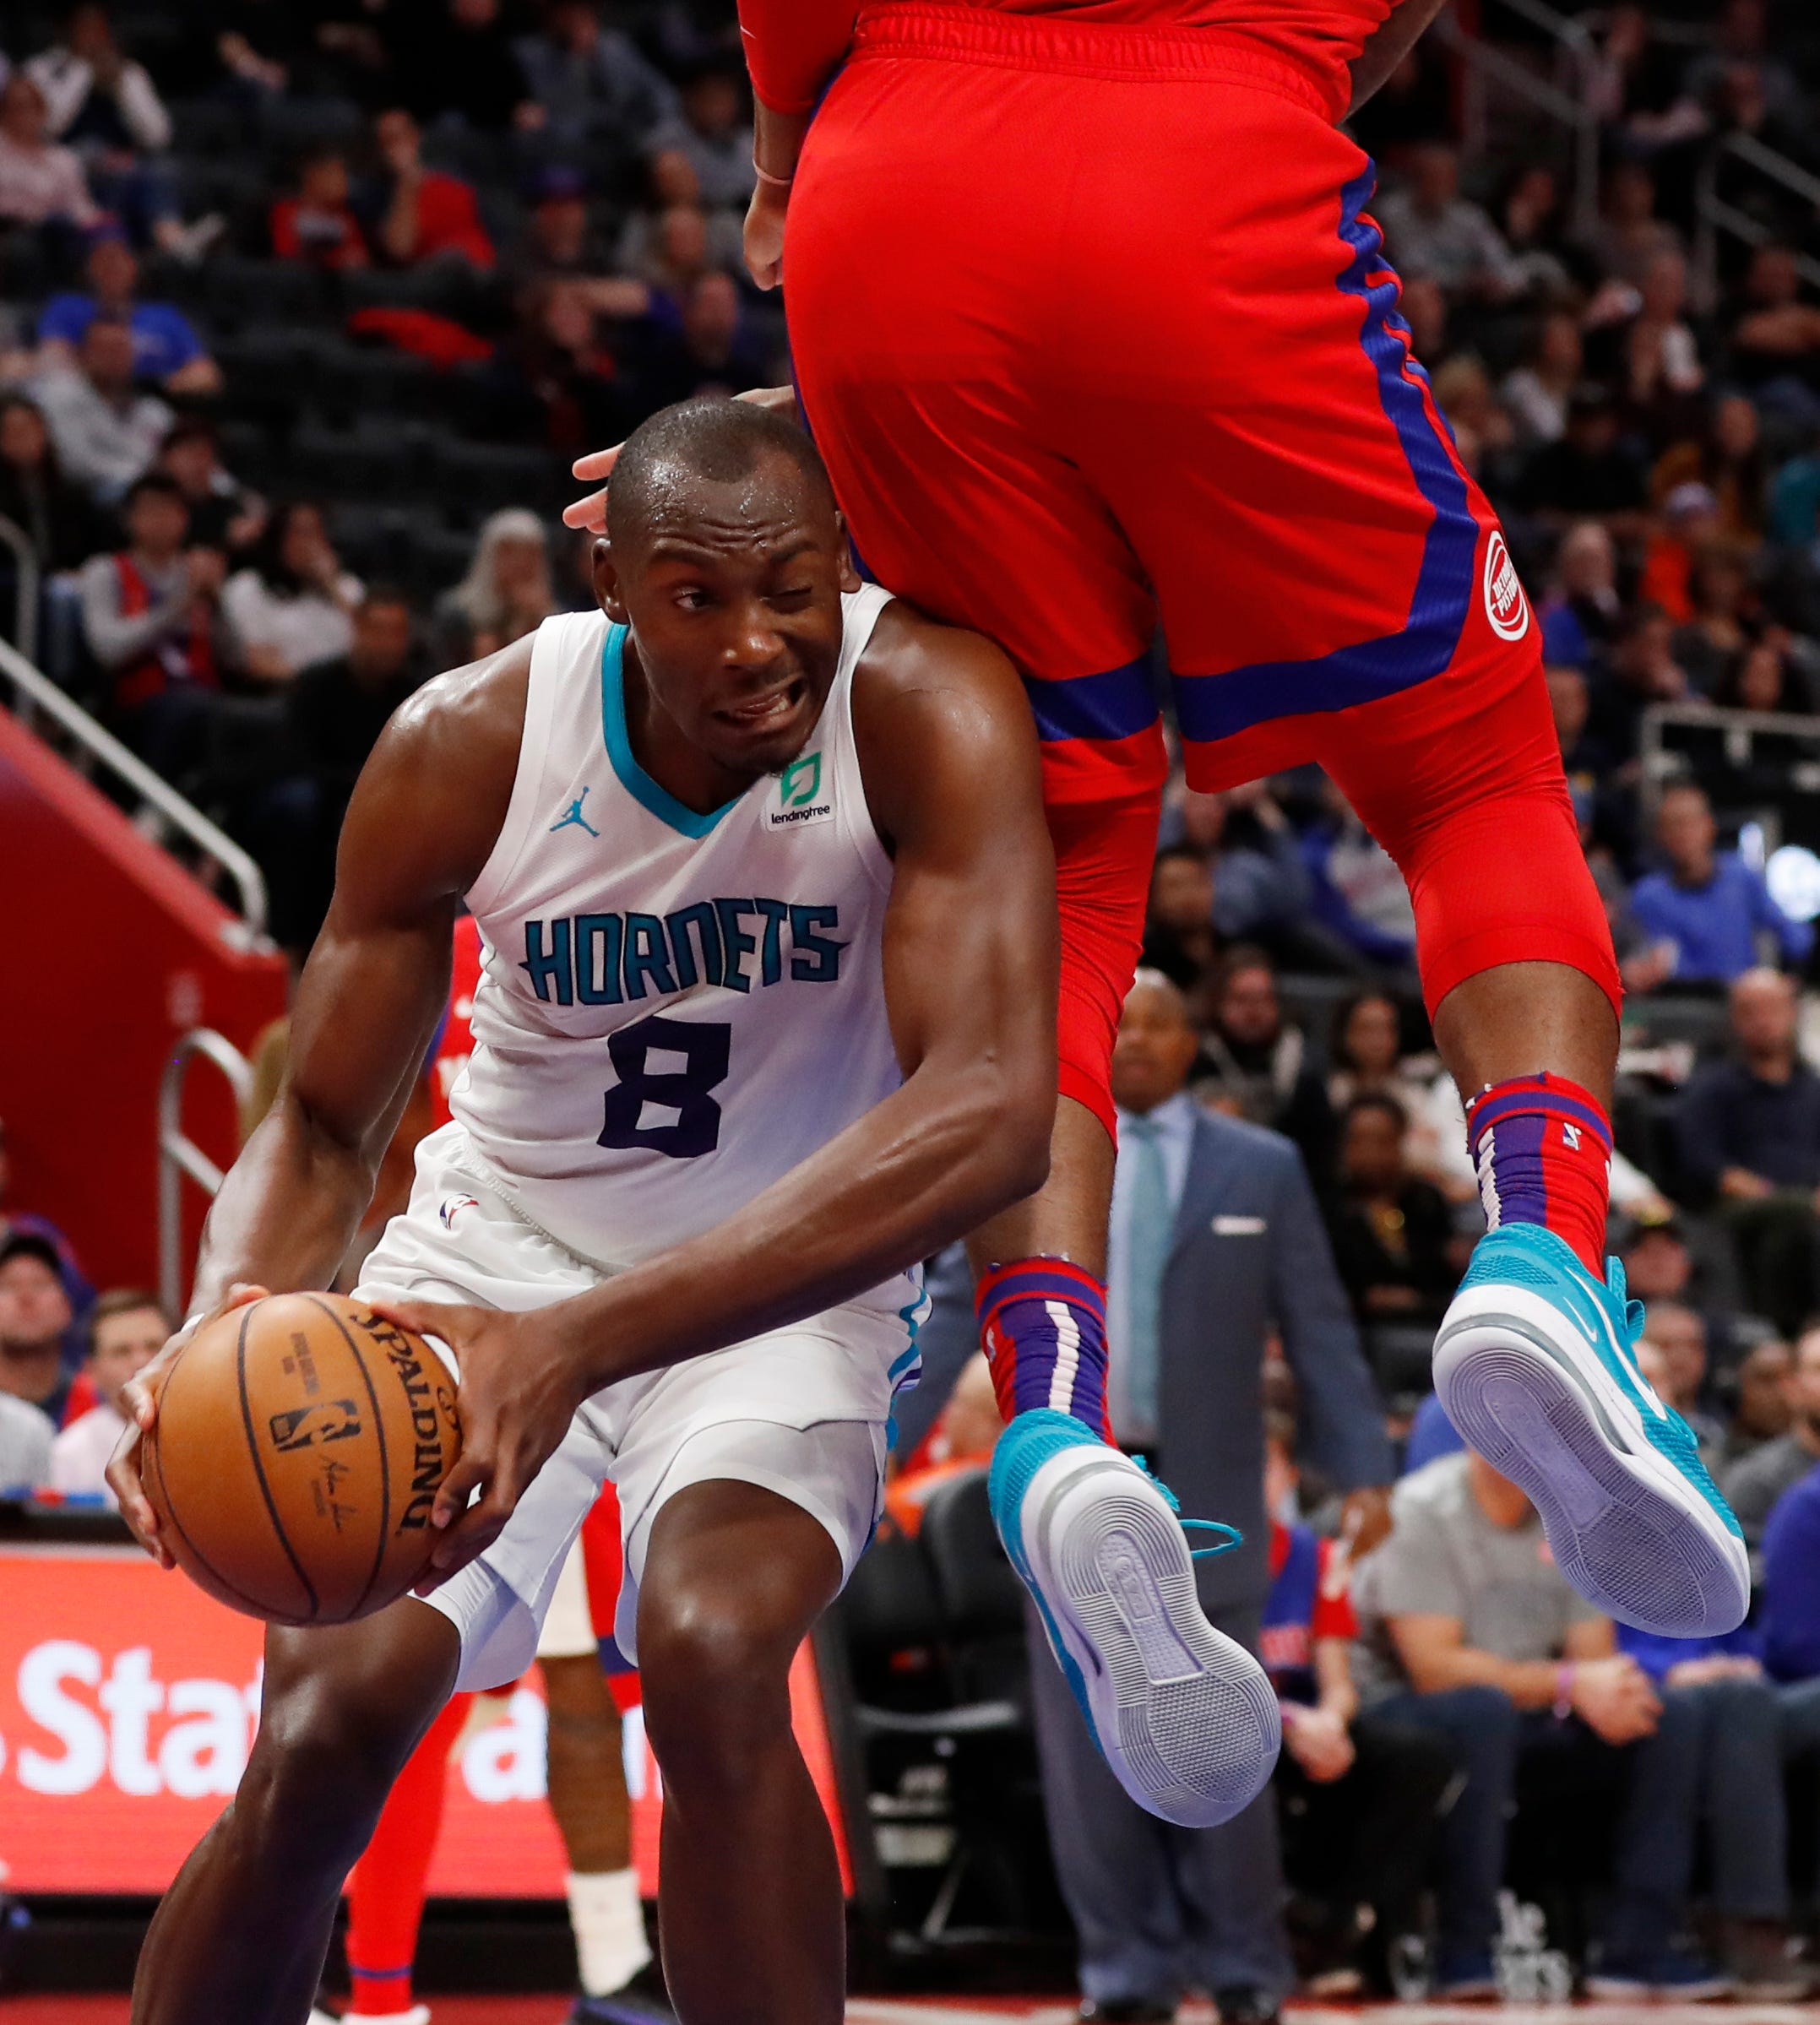 Hornets center Bismack Biyombo is fouled by Pistons center Andre Drummond during the second half.